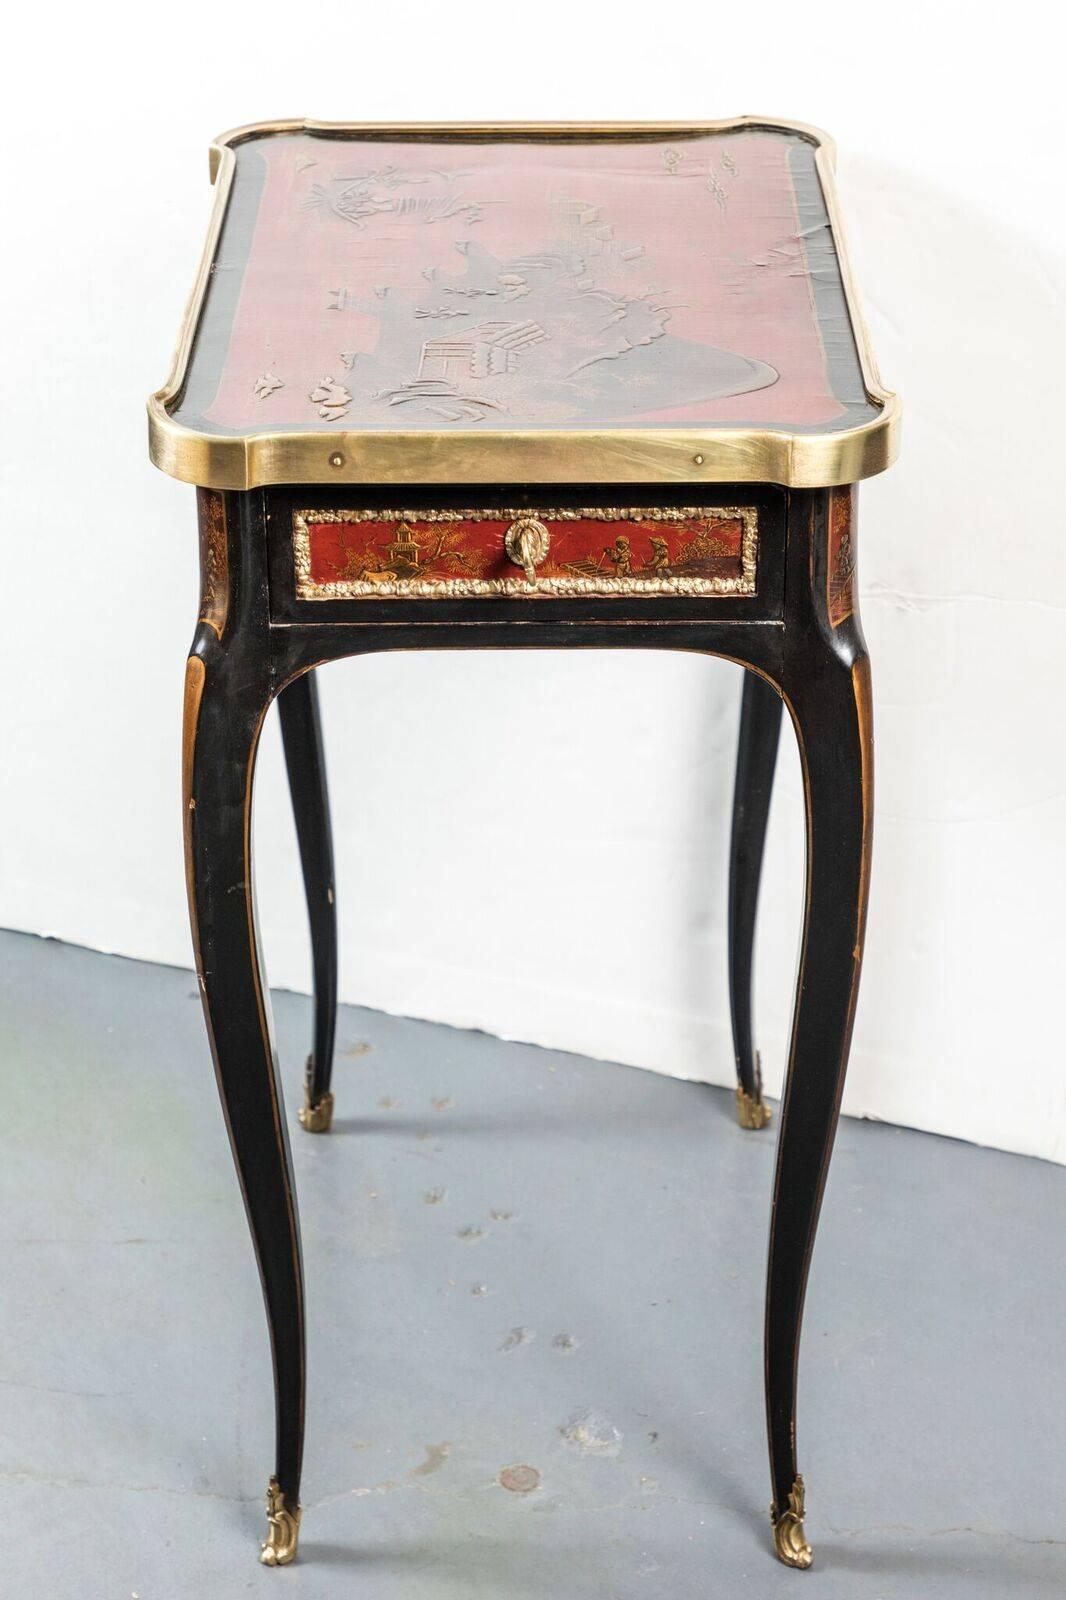 A very fine, petite, rouge and black lacquer, single drawer occasional table with a hand-painted top surrounded by a gilt bronze lip. The whole on tapered, cabriole legs terminating in ormolu feet.